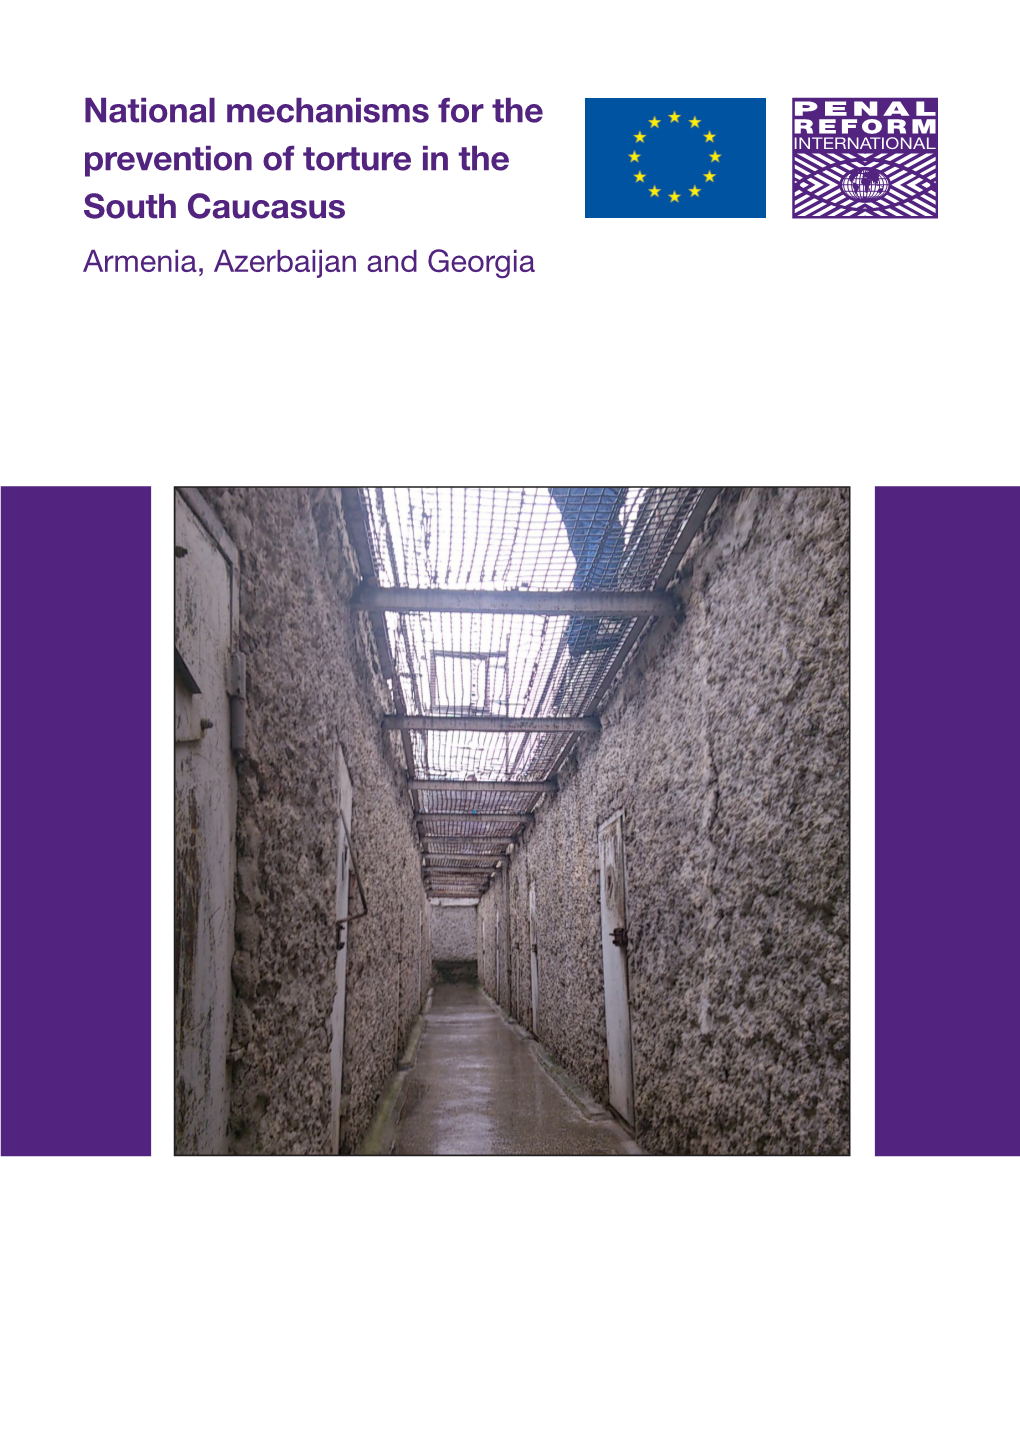 National Mechanisms for the Prevention of Torture in the South Caucasus Armenia, Azerbaijan and Georgia